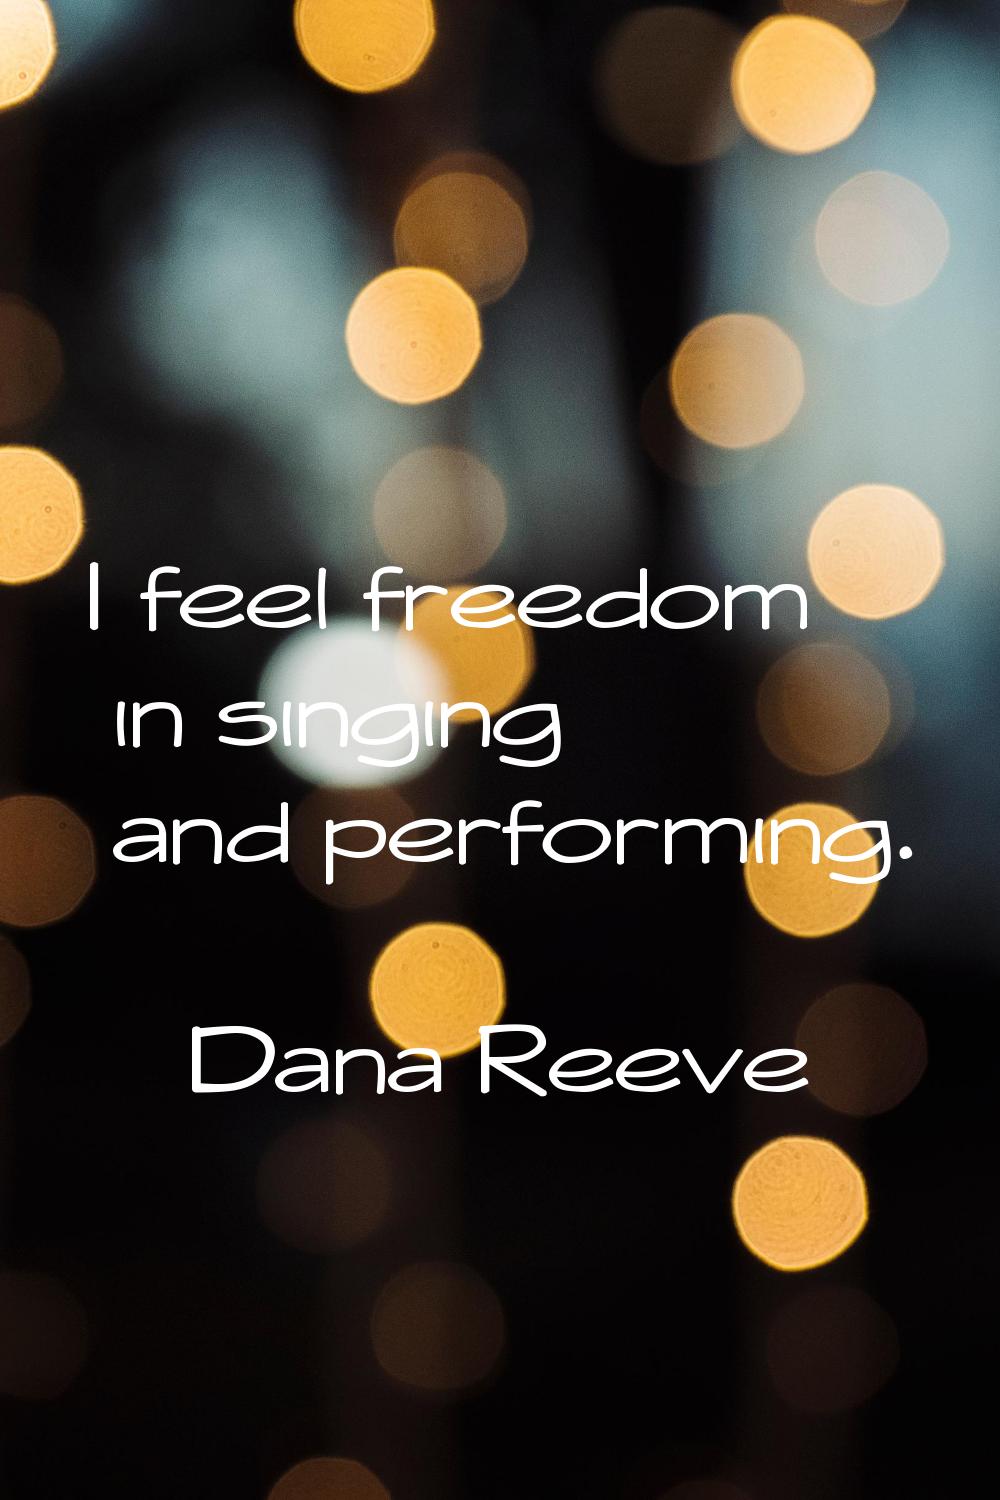 I feel freedom in singing and performing.